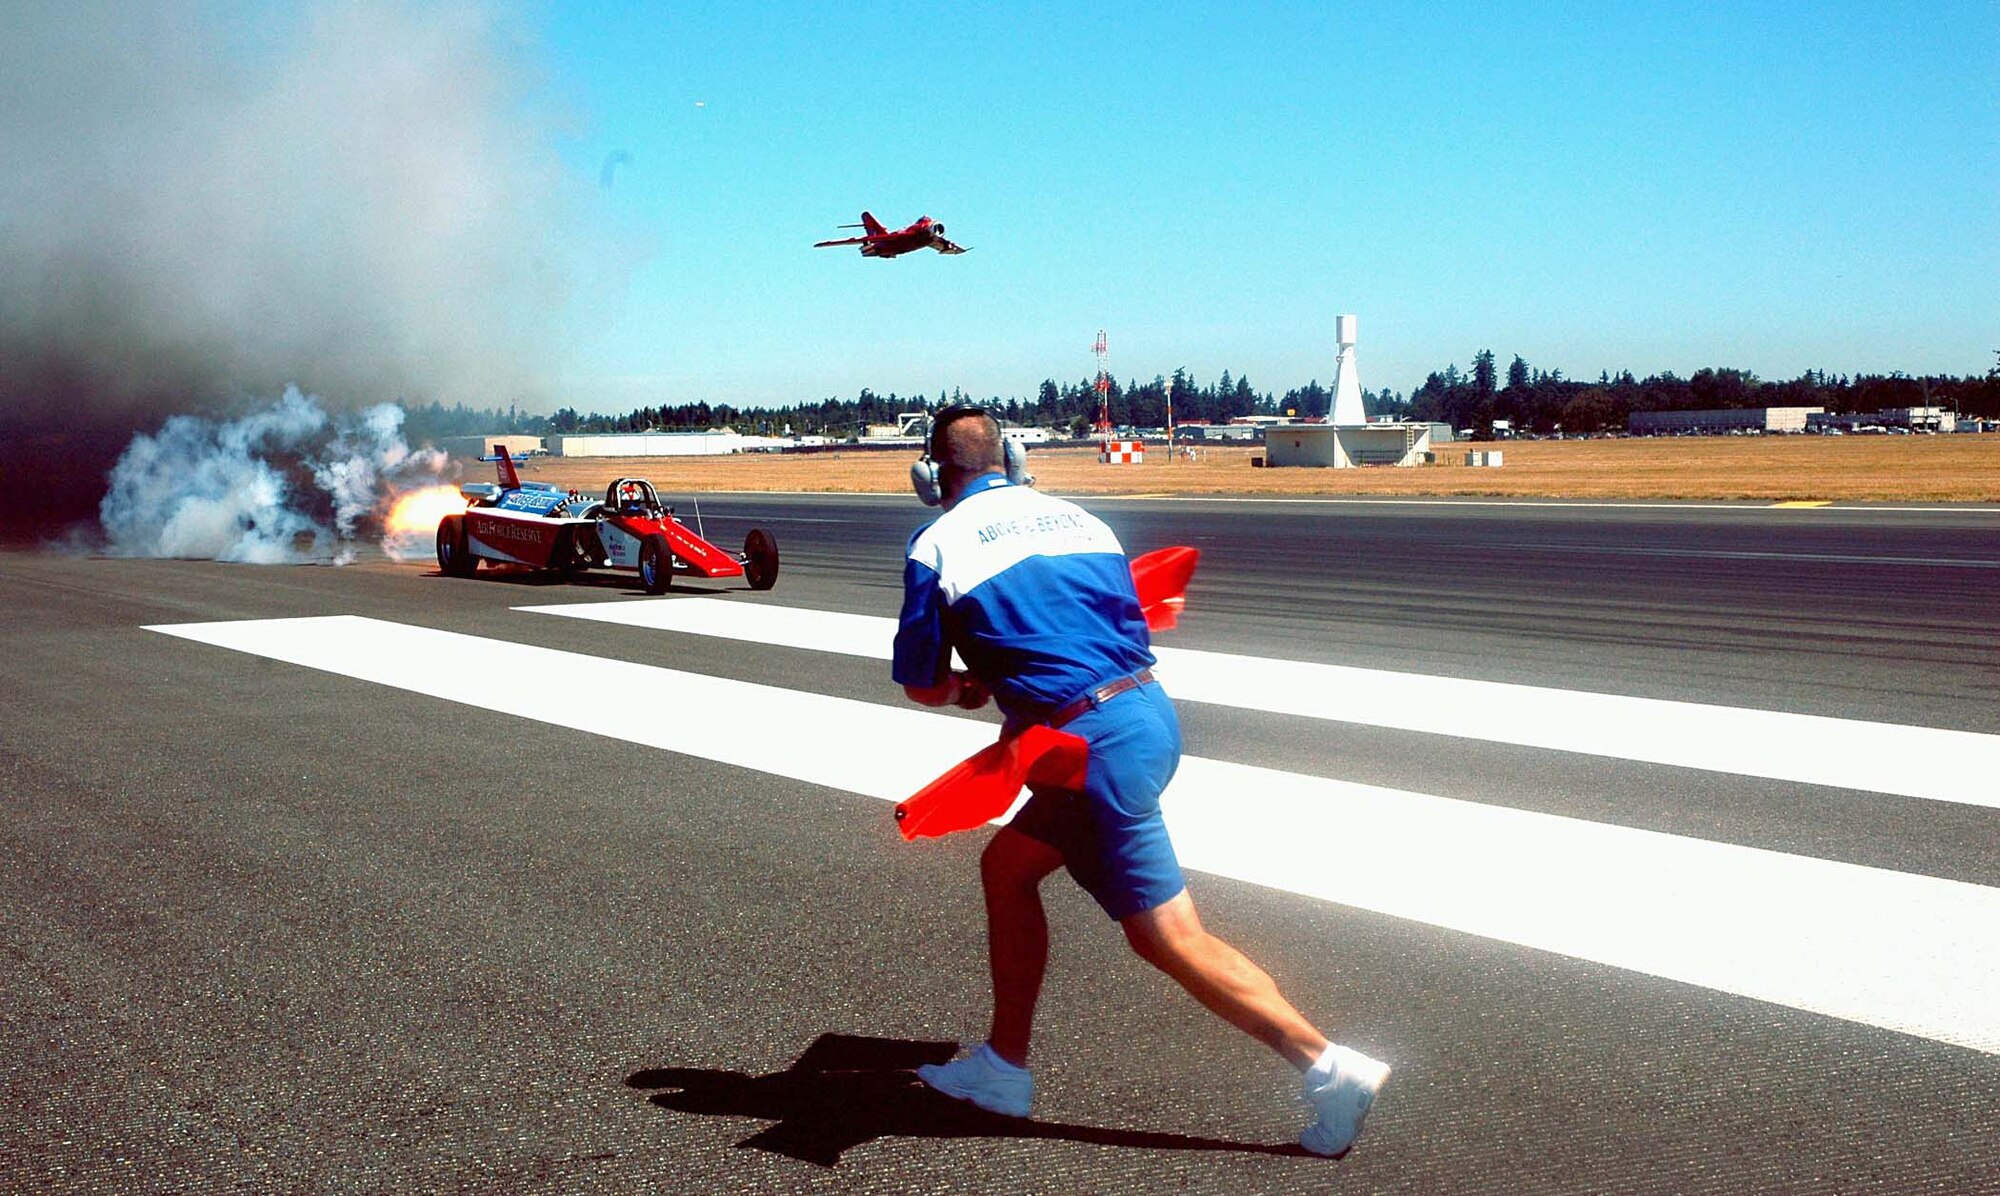 Air Force Reserve jet car crew chief Bill Braack signals his driver, Scott Hammack, to start the race at the 2005 McChord Air Force Base Expo. The Smoke and Thunder jet car show will appear again at McChord during the 2008 McChord Air Expo July 19-20. The air expo is free and open to the public, featuring numerous displays, static aircraft, and aerial demonstrations, to include the U.S. Air Force Thunderbirds precision aerial demonstration team. (U.S. Air Force file photo/Tech. Sgt. Nick Przybyciel)